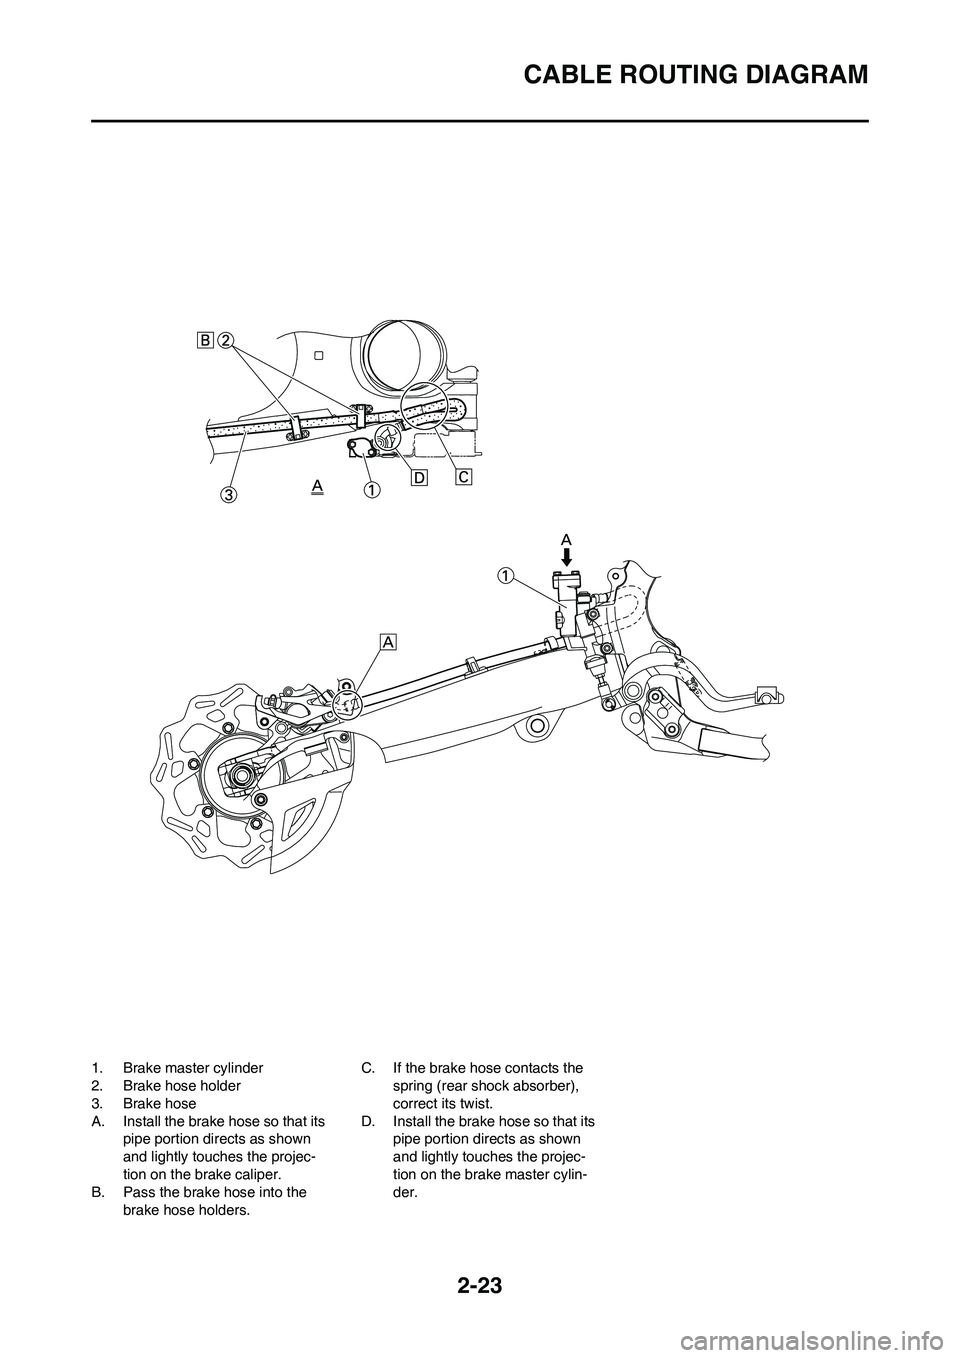 YAMAHA YZ450F 2009 Service Manual 2-23
CABLE ROUTING DIAGRAM
1. Brake master cylinder
2. Brake hose holder
3. Brake hose
A. Install the brake hose so that its 
pipe portion directs as shown 
and lightly touches the projec-
tion on the